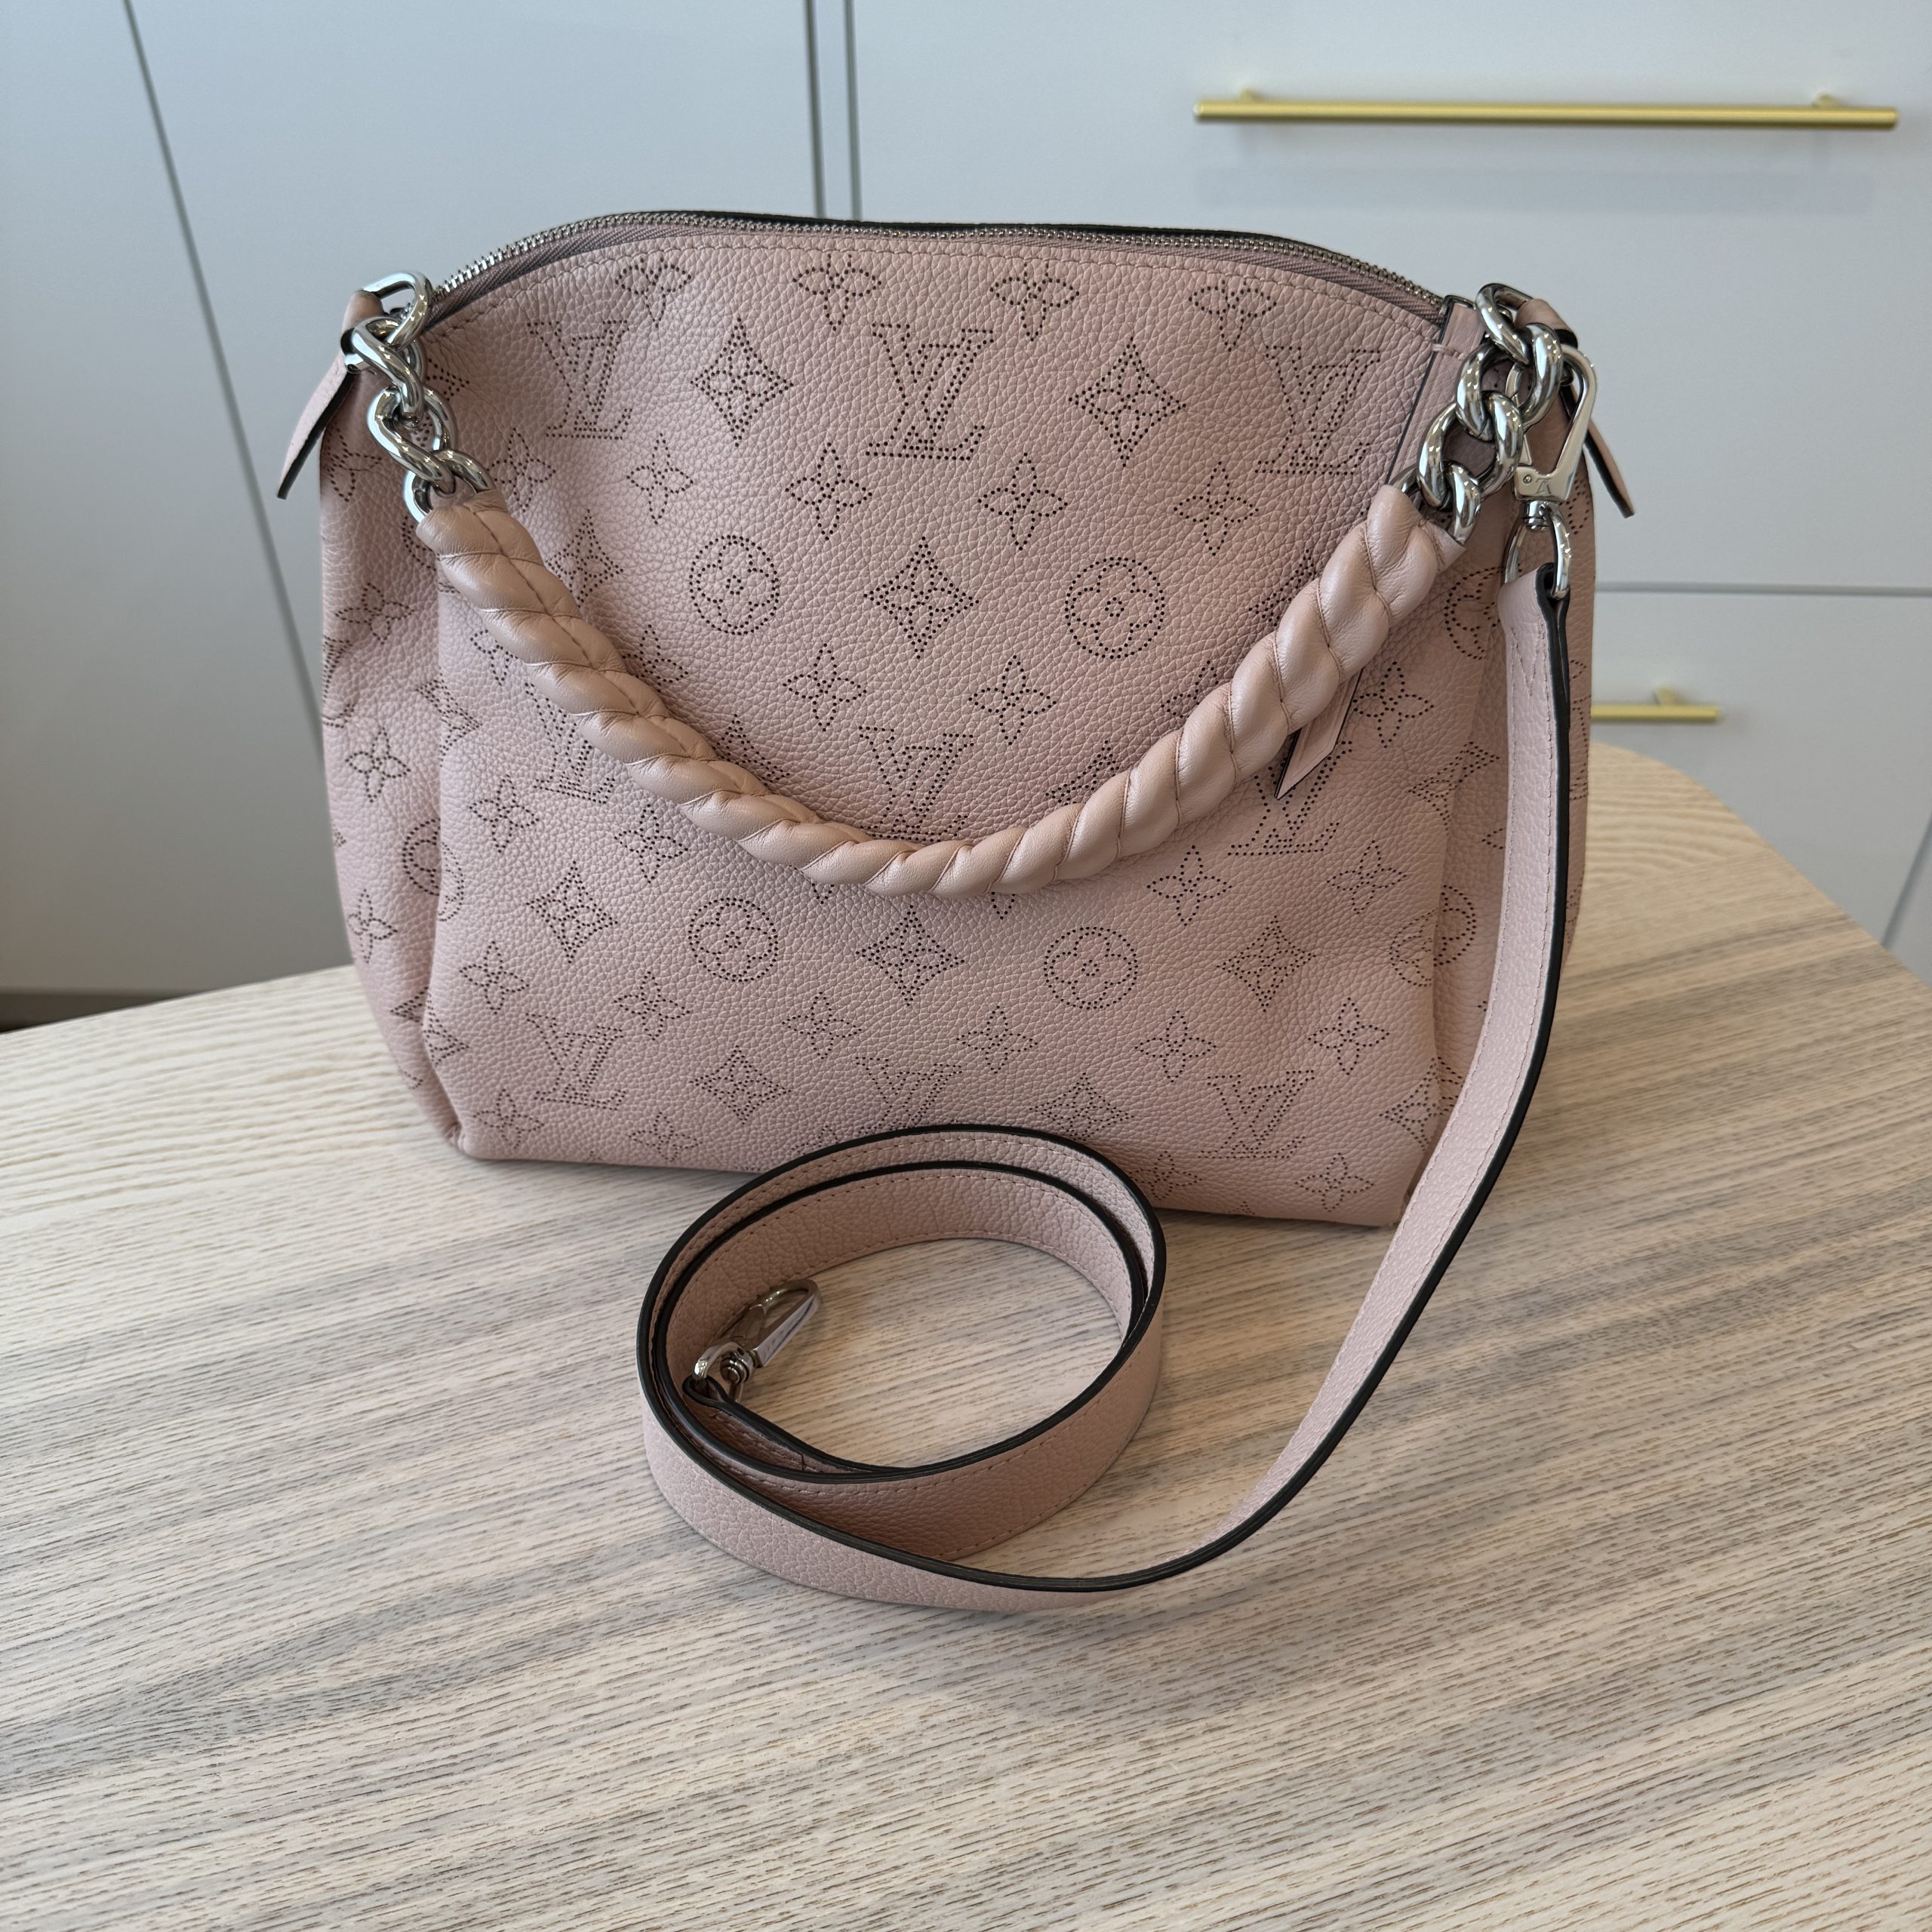 Products By Louis Vuitton: Babylone Chain Bb